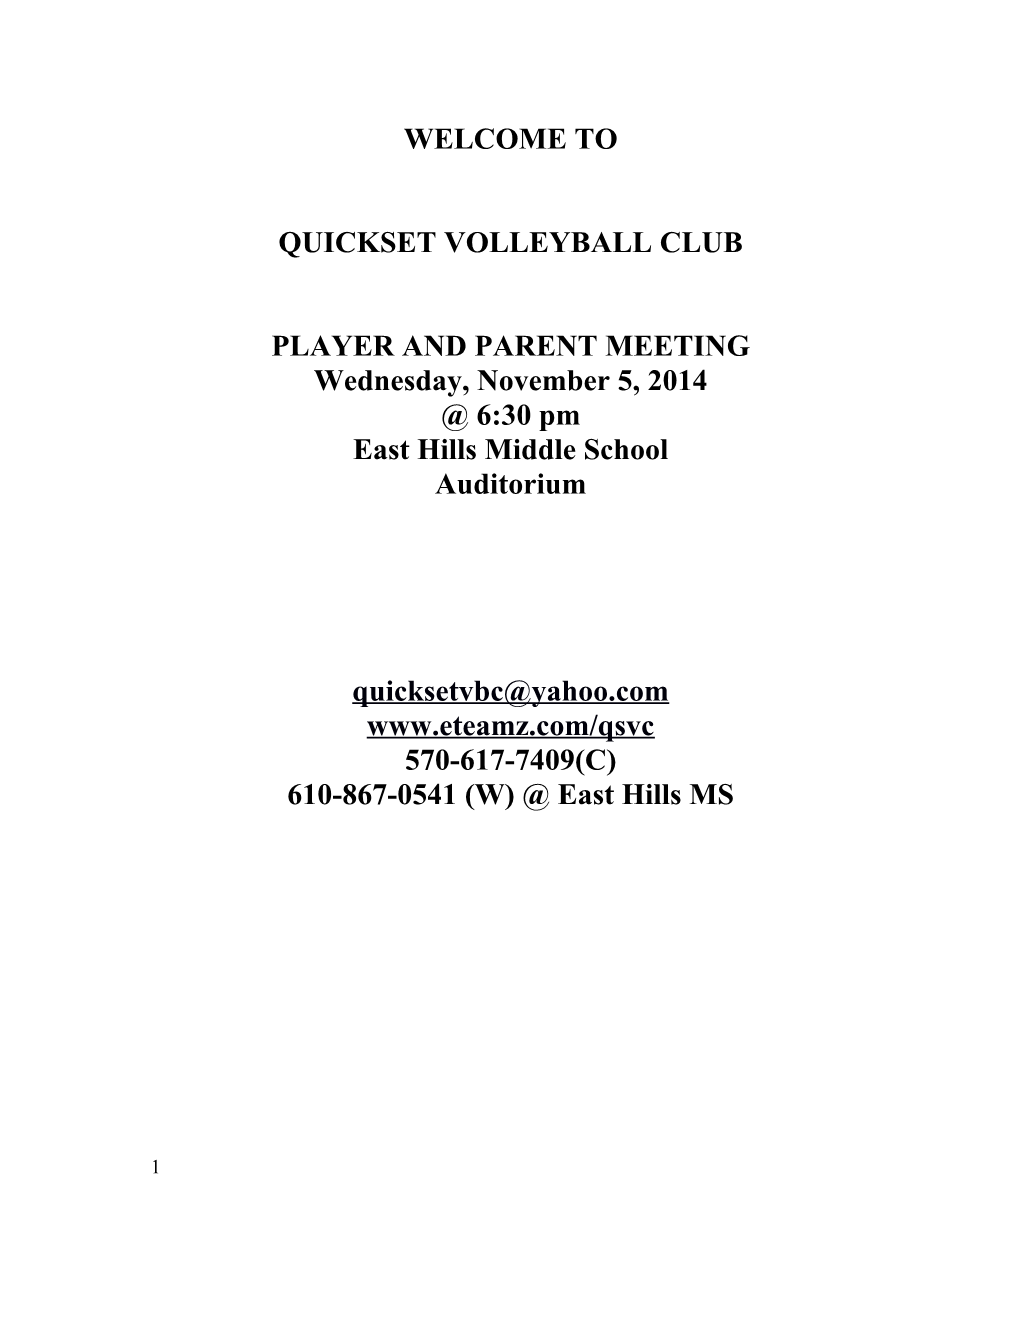 Player and Parent Meeting